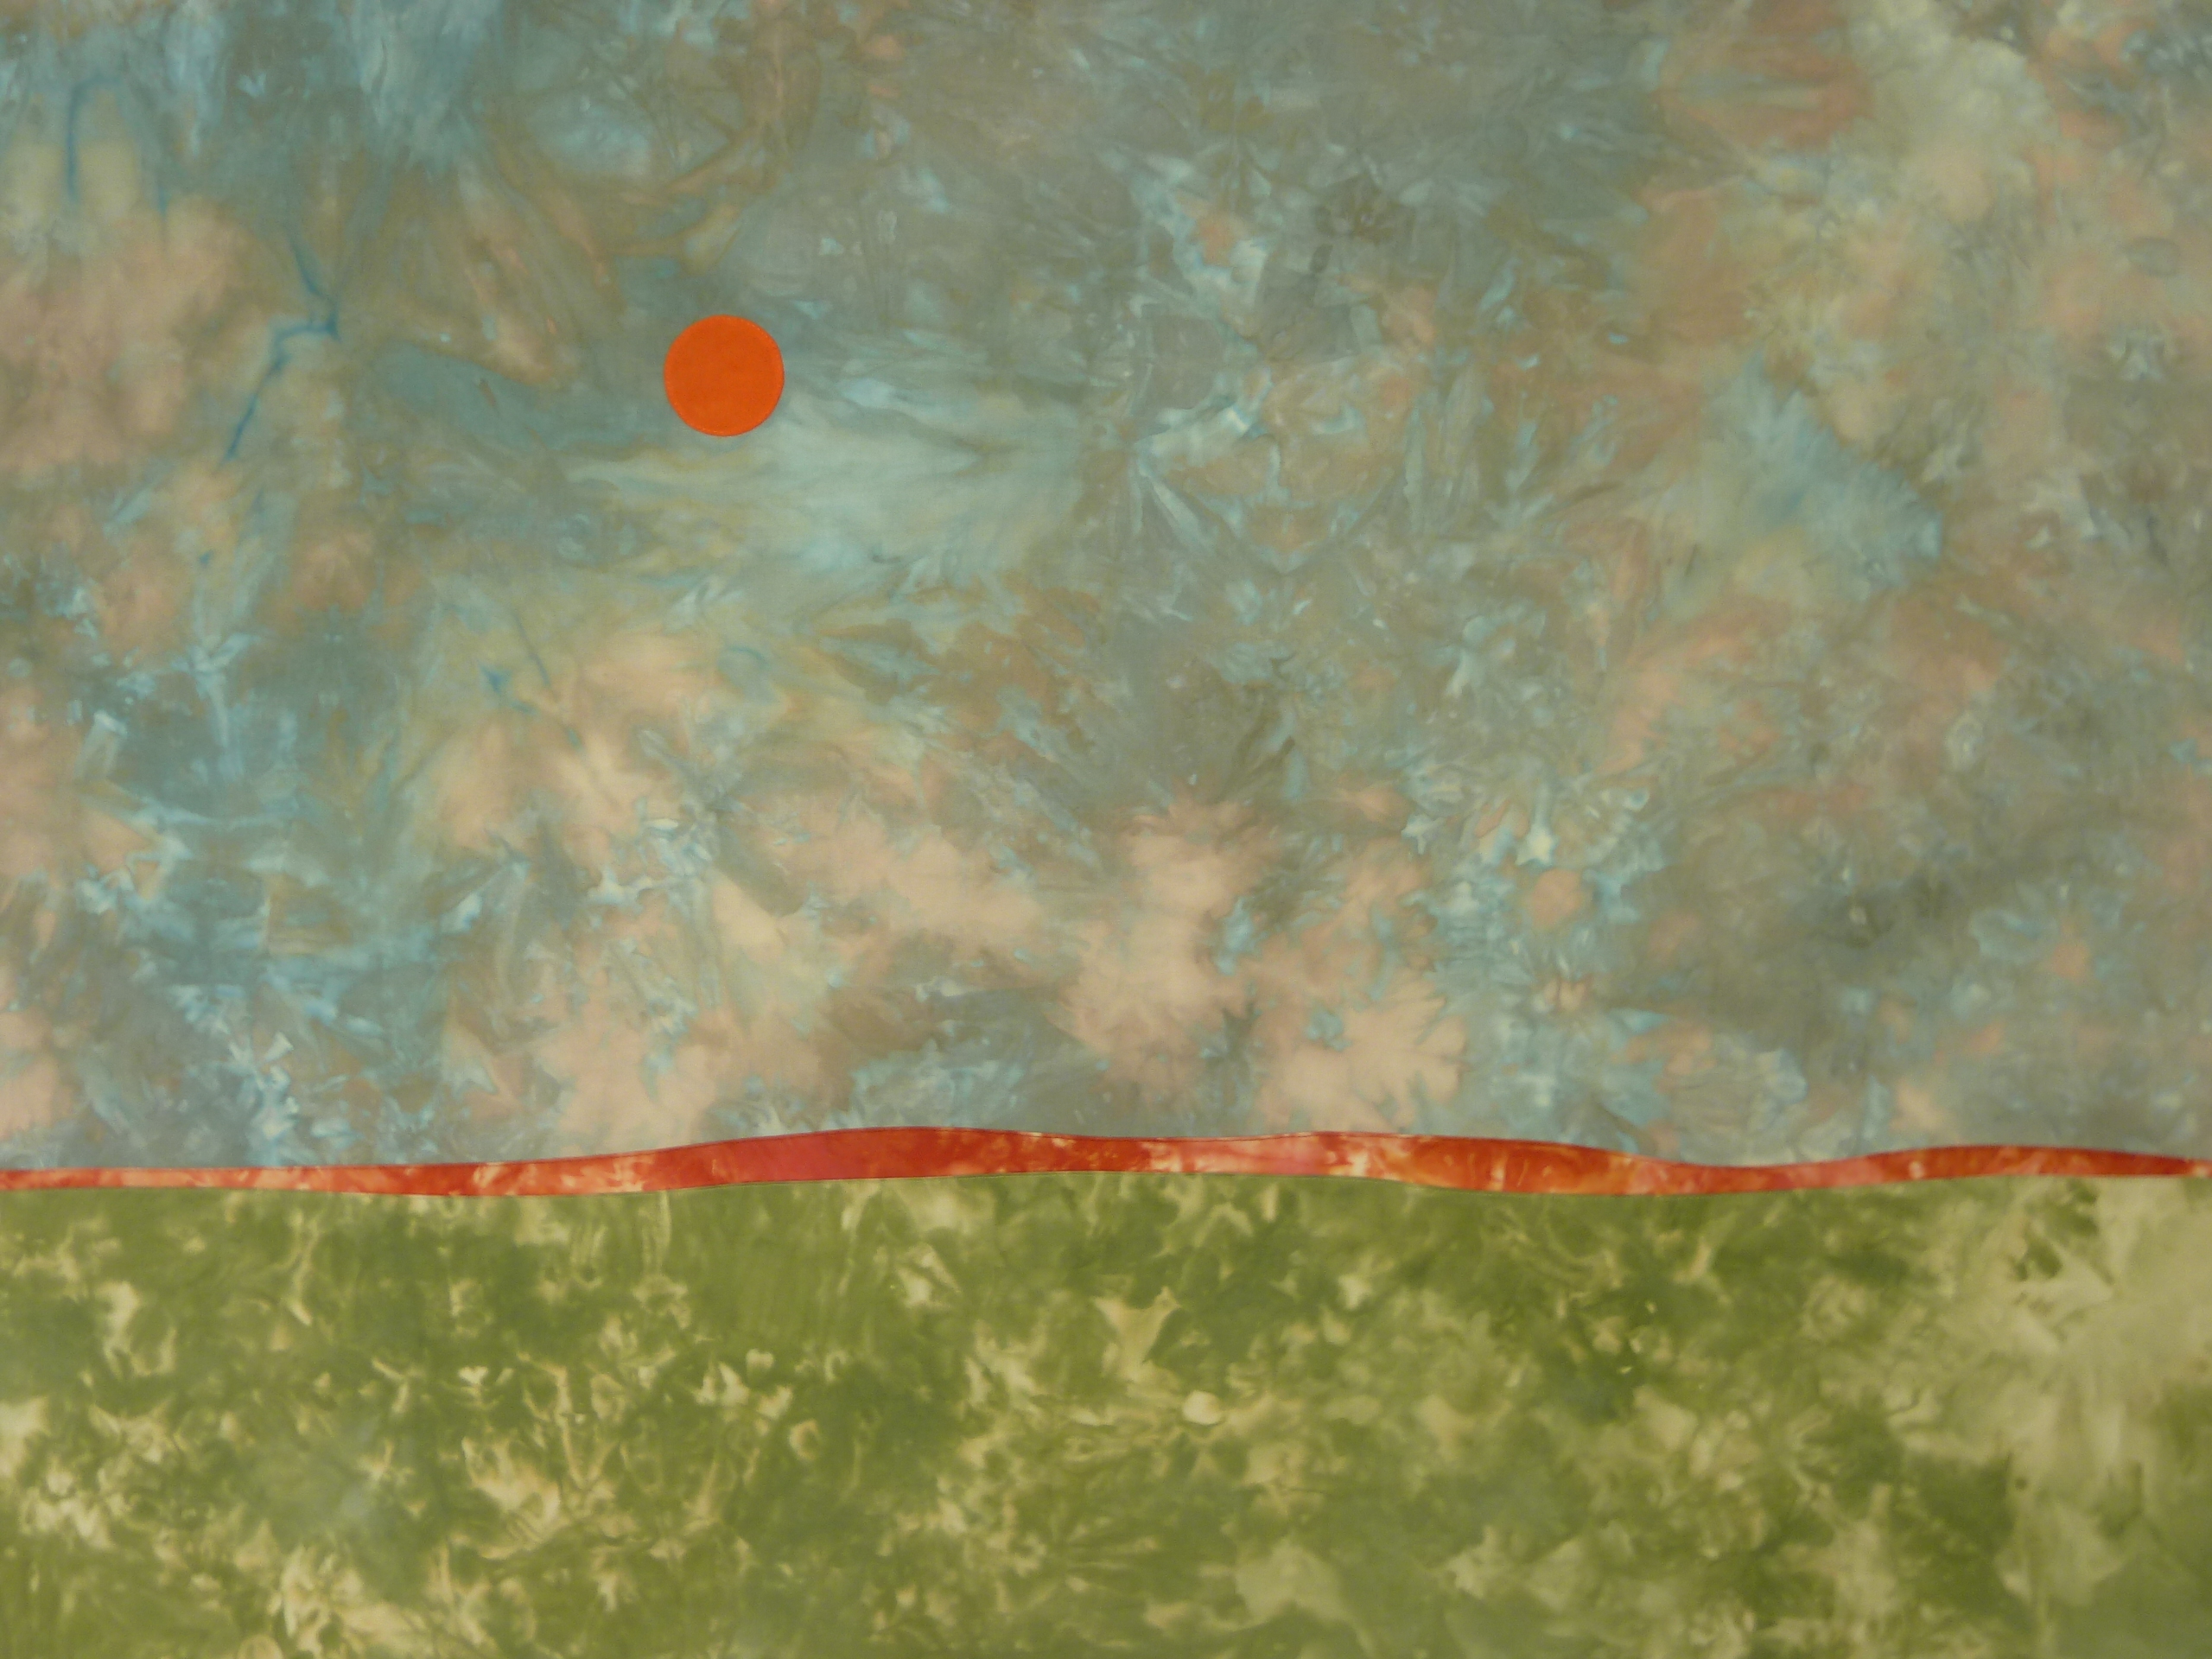 Dyed textile with blue sky, green prairie, red sun, and red strip on horizon in mottled pattern.